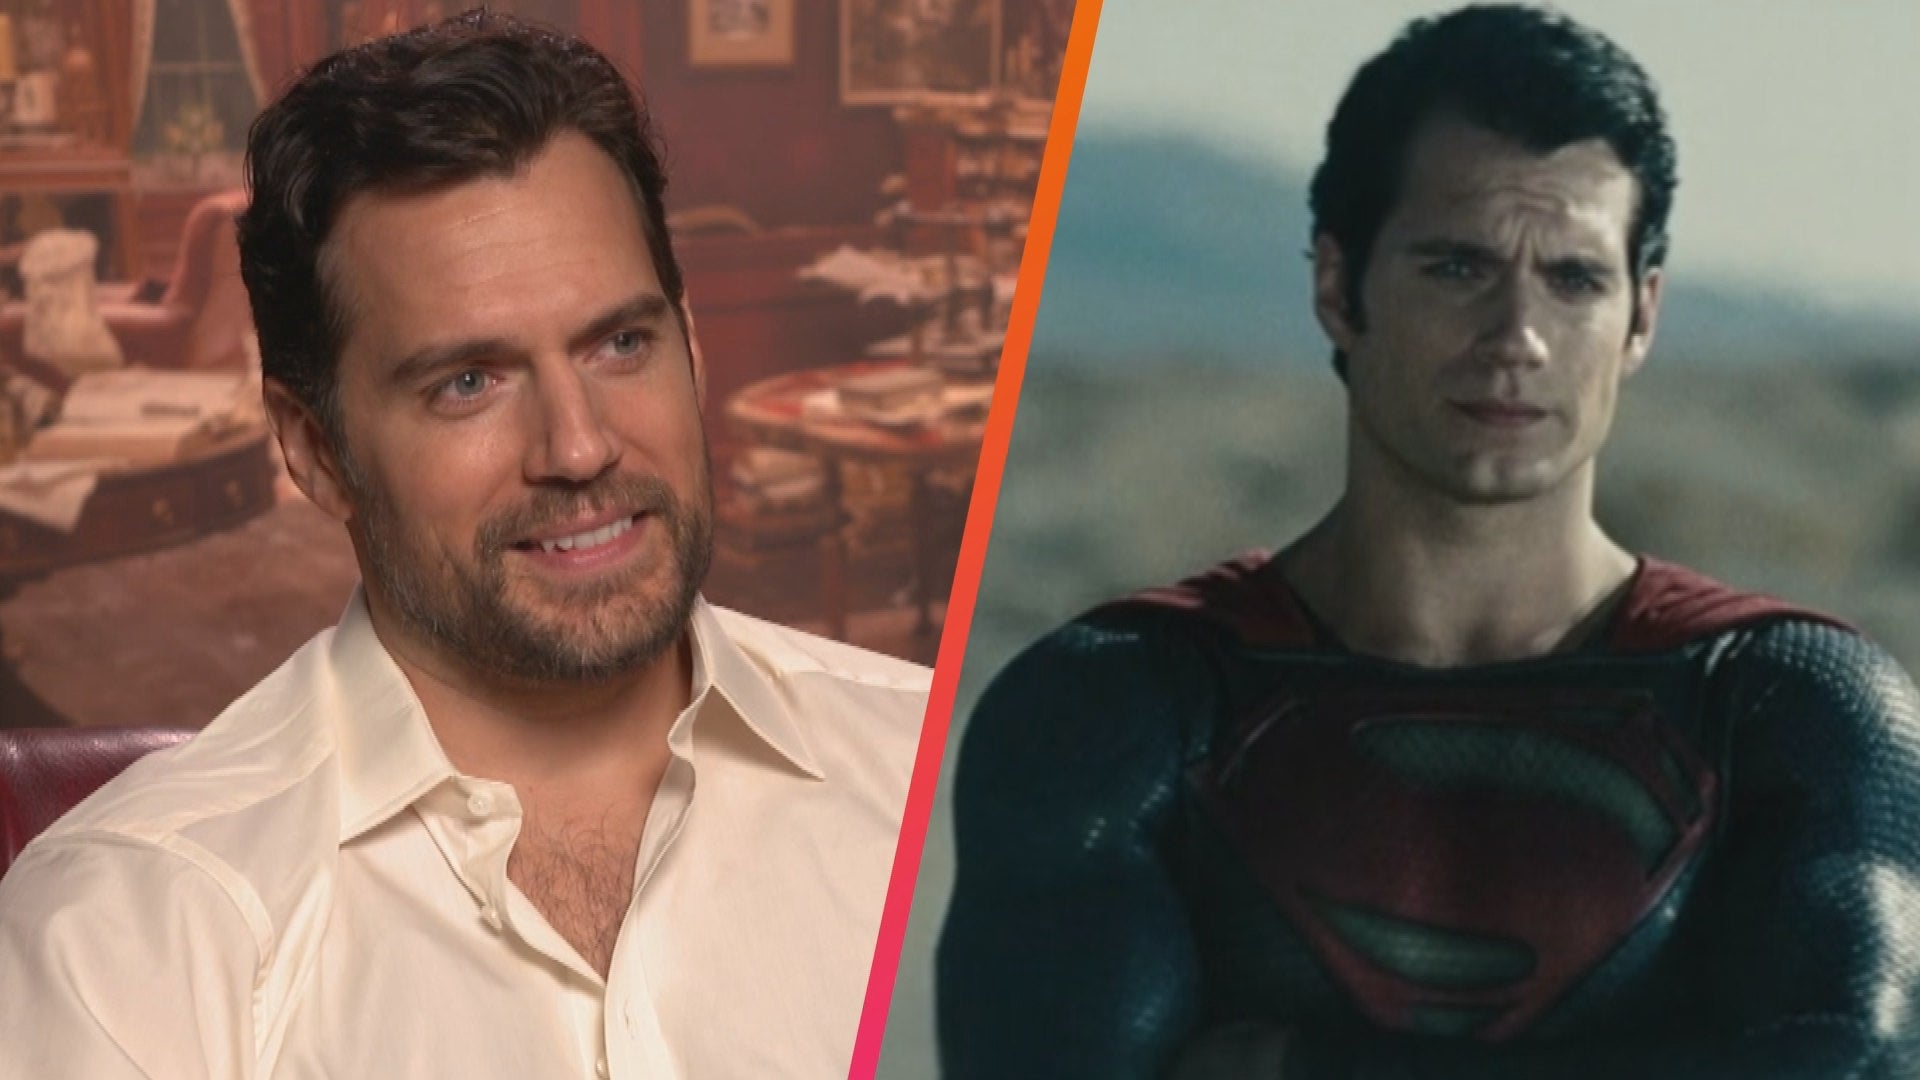 What Henry Cavill's Renaissance Could Mean for Movie Stardom